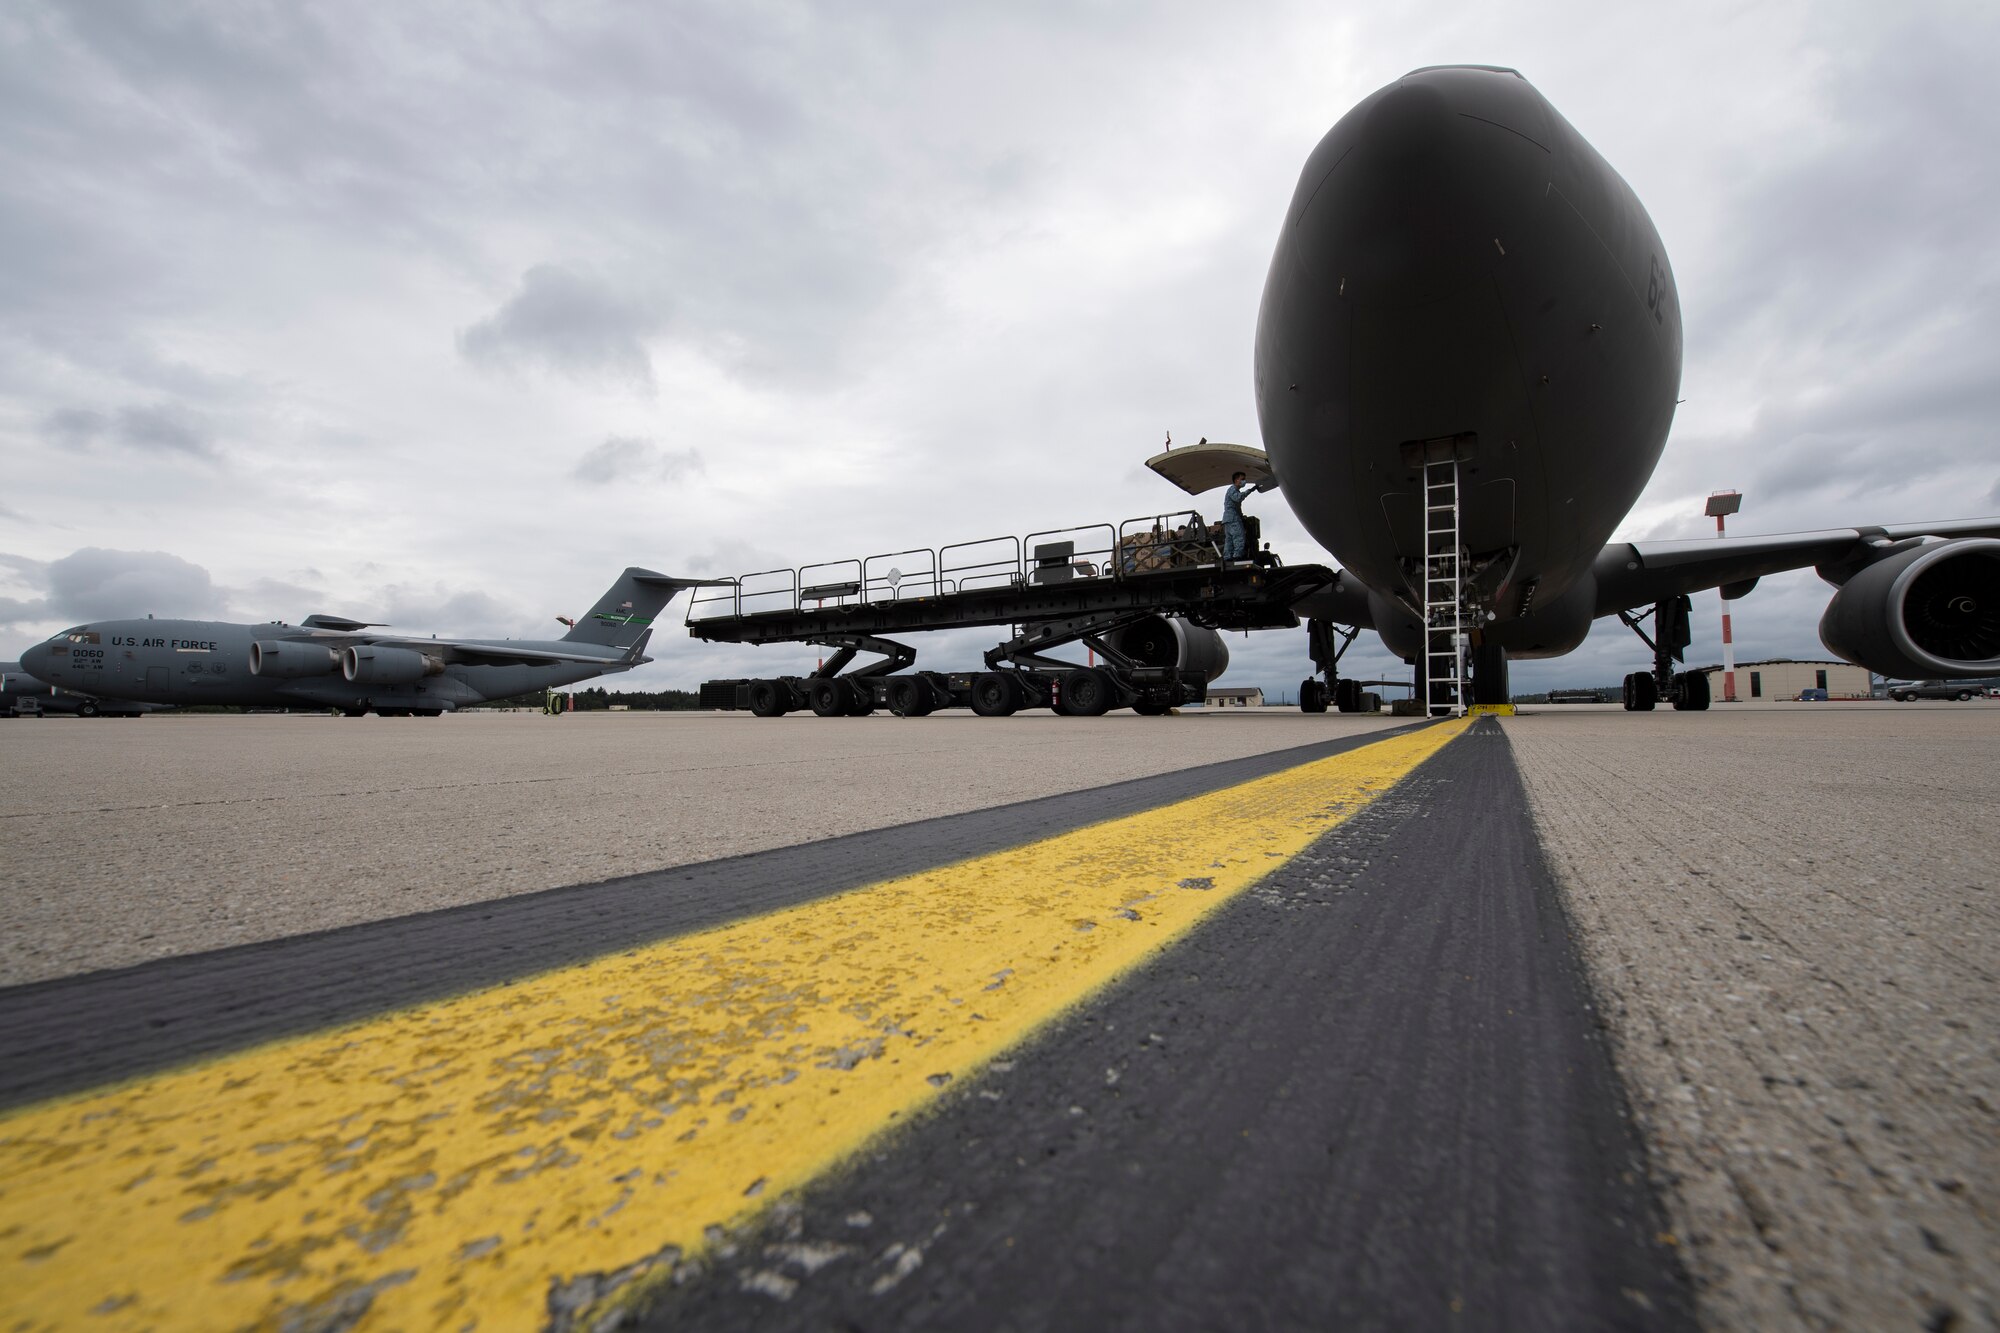 Republic of Singapore Air Force personnel and a U.S. Air Force Airman from the 726th Air Mobility Squadron load cargo onto a RSAF A330 Multi-Role Tanker Transport aircraft.